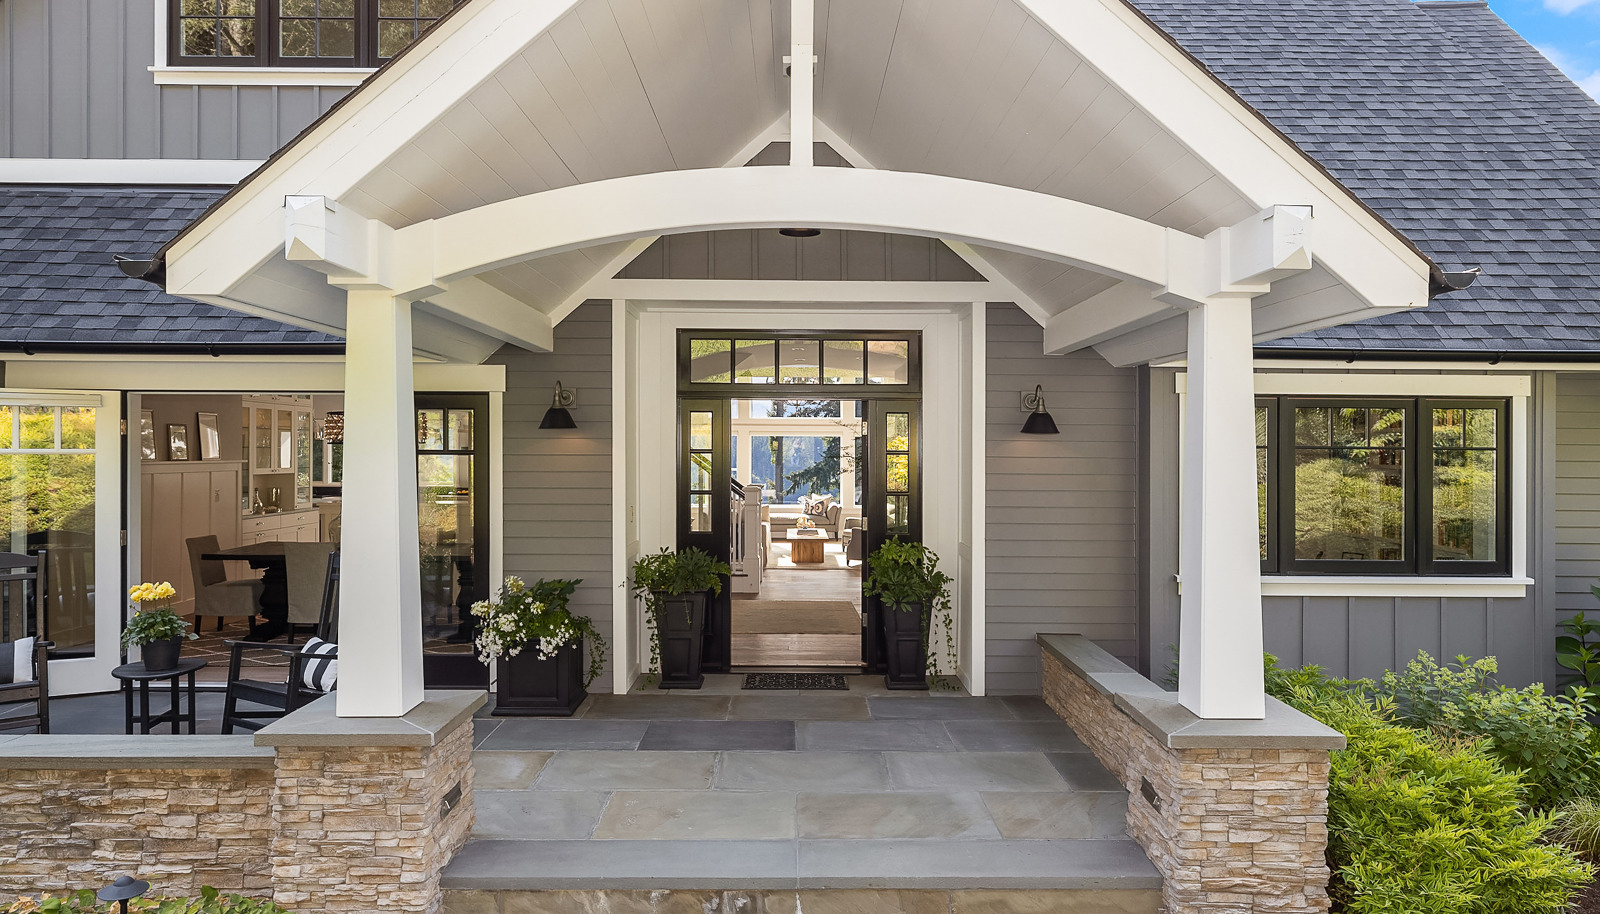 Beautiful covered porch welcomes you in!